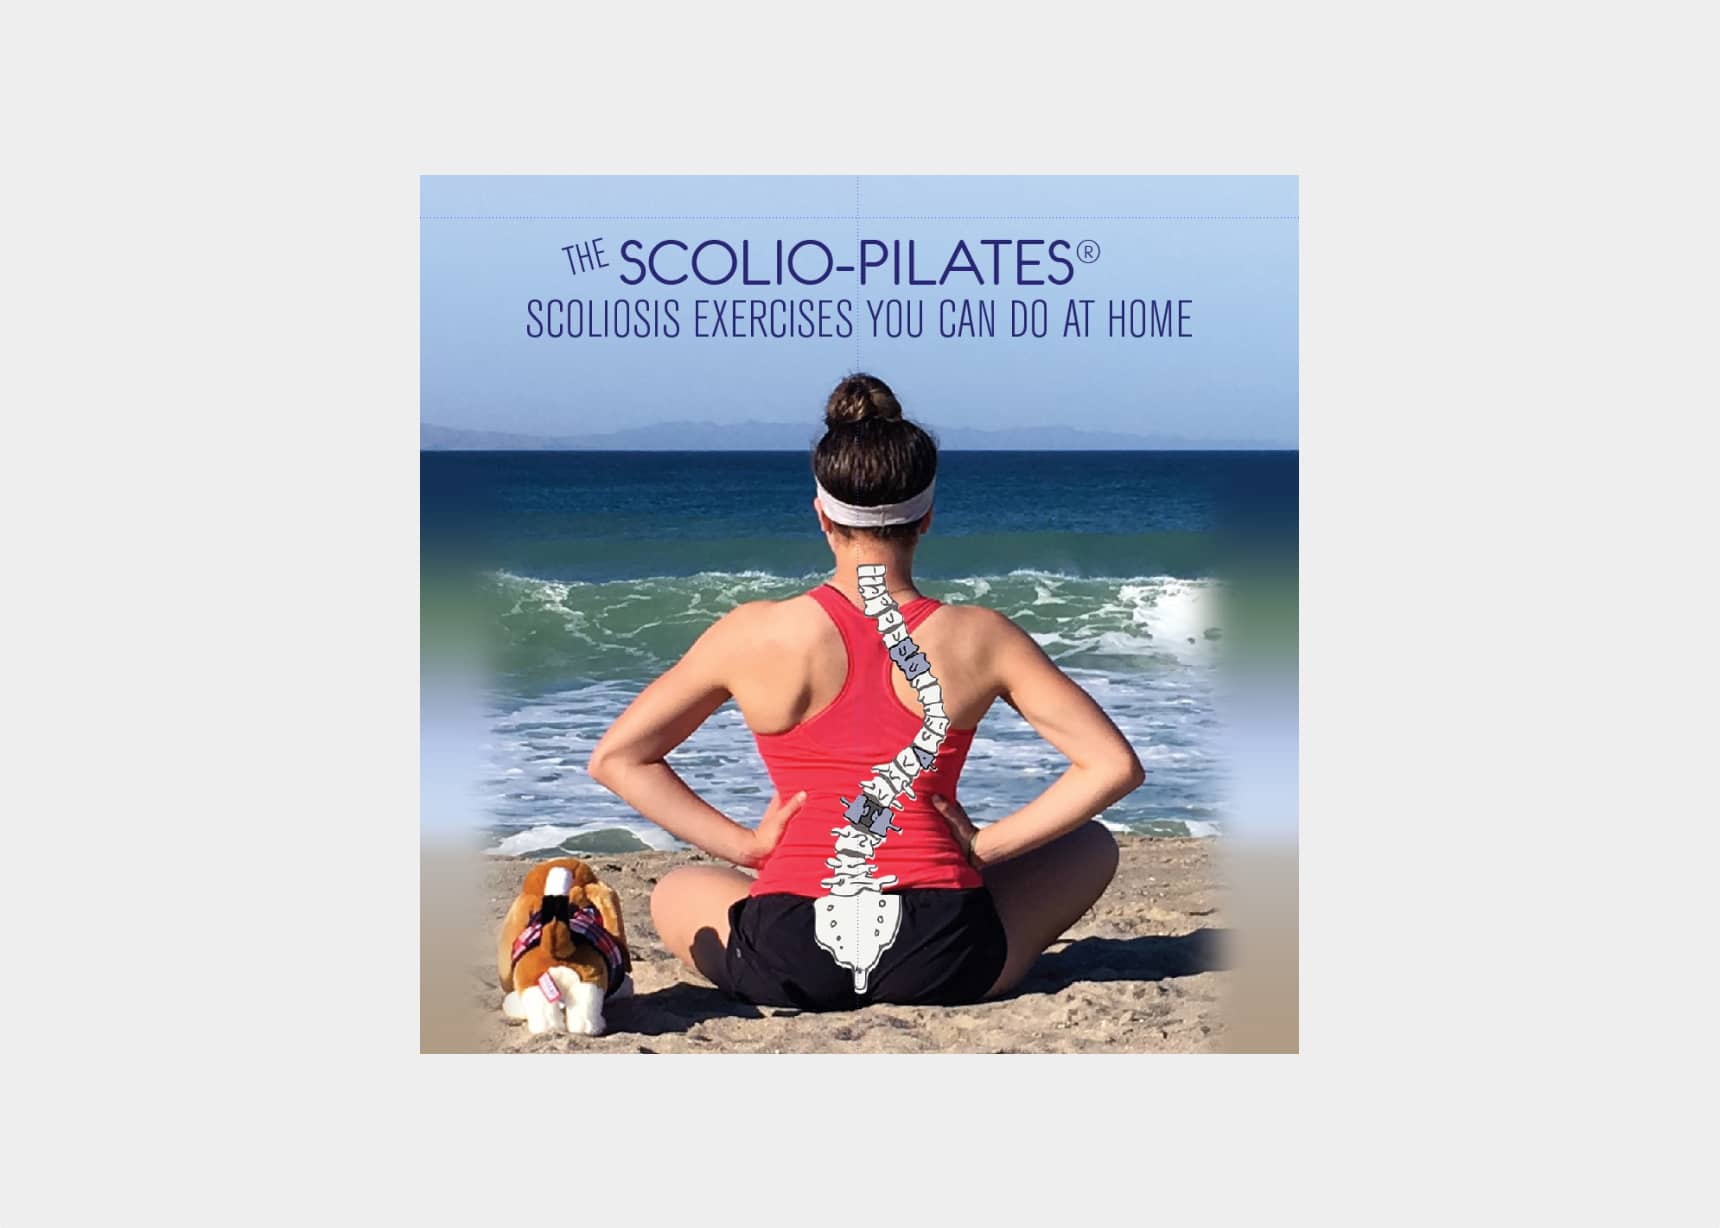 For children and adults with scoliosis along with practitioners, this book is designed to accompany The Scolio-Pilates Book.